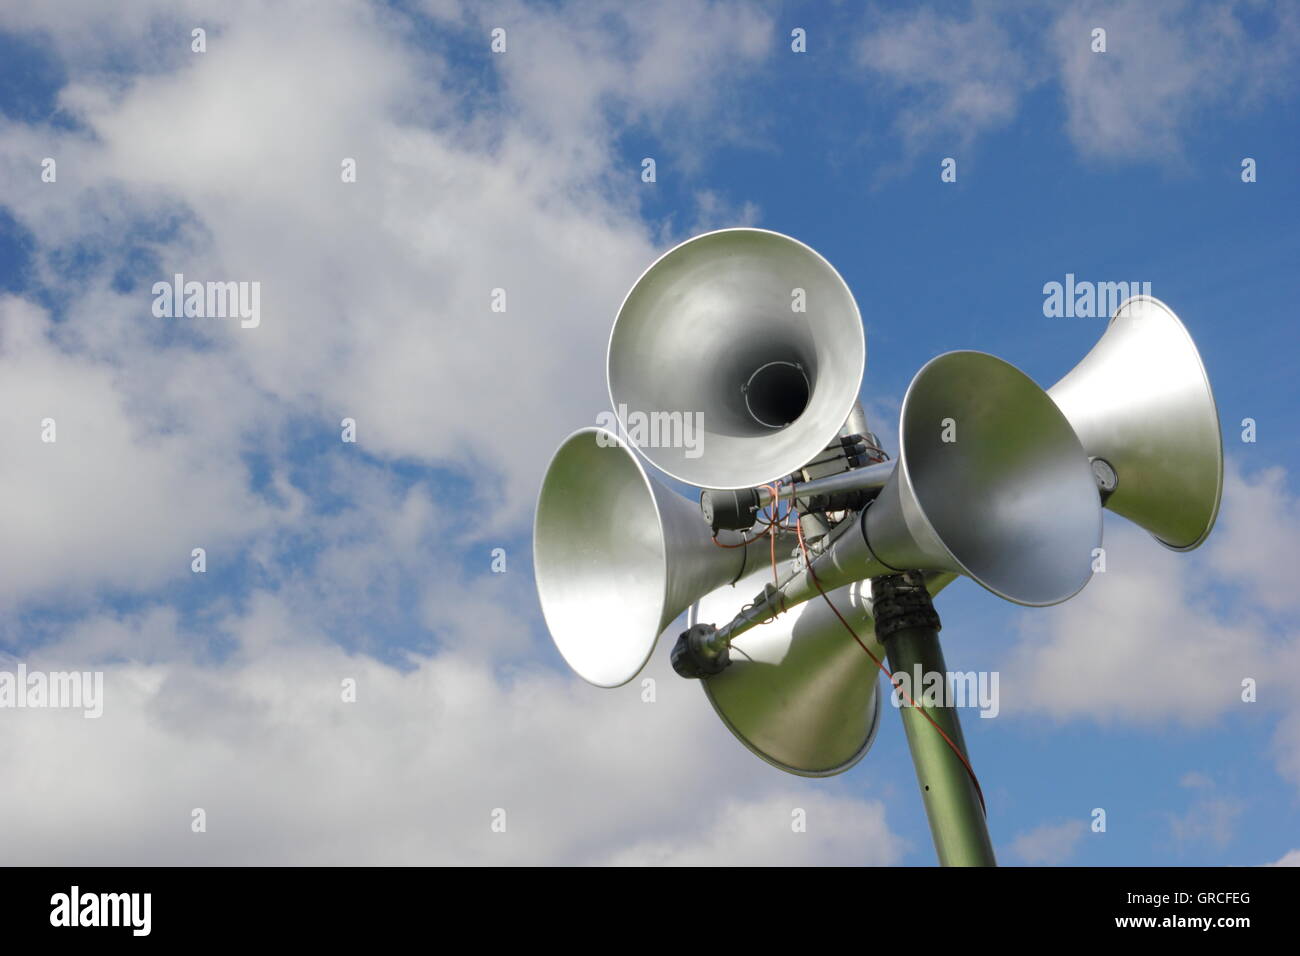 Loud speakers on a public address system against a blue sky and clouds. Copy space. Stock Photo